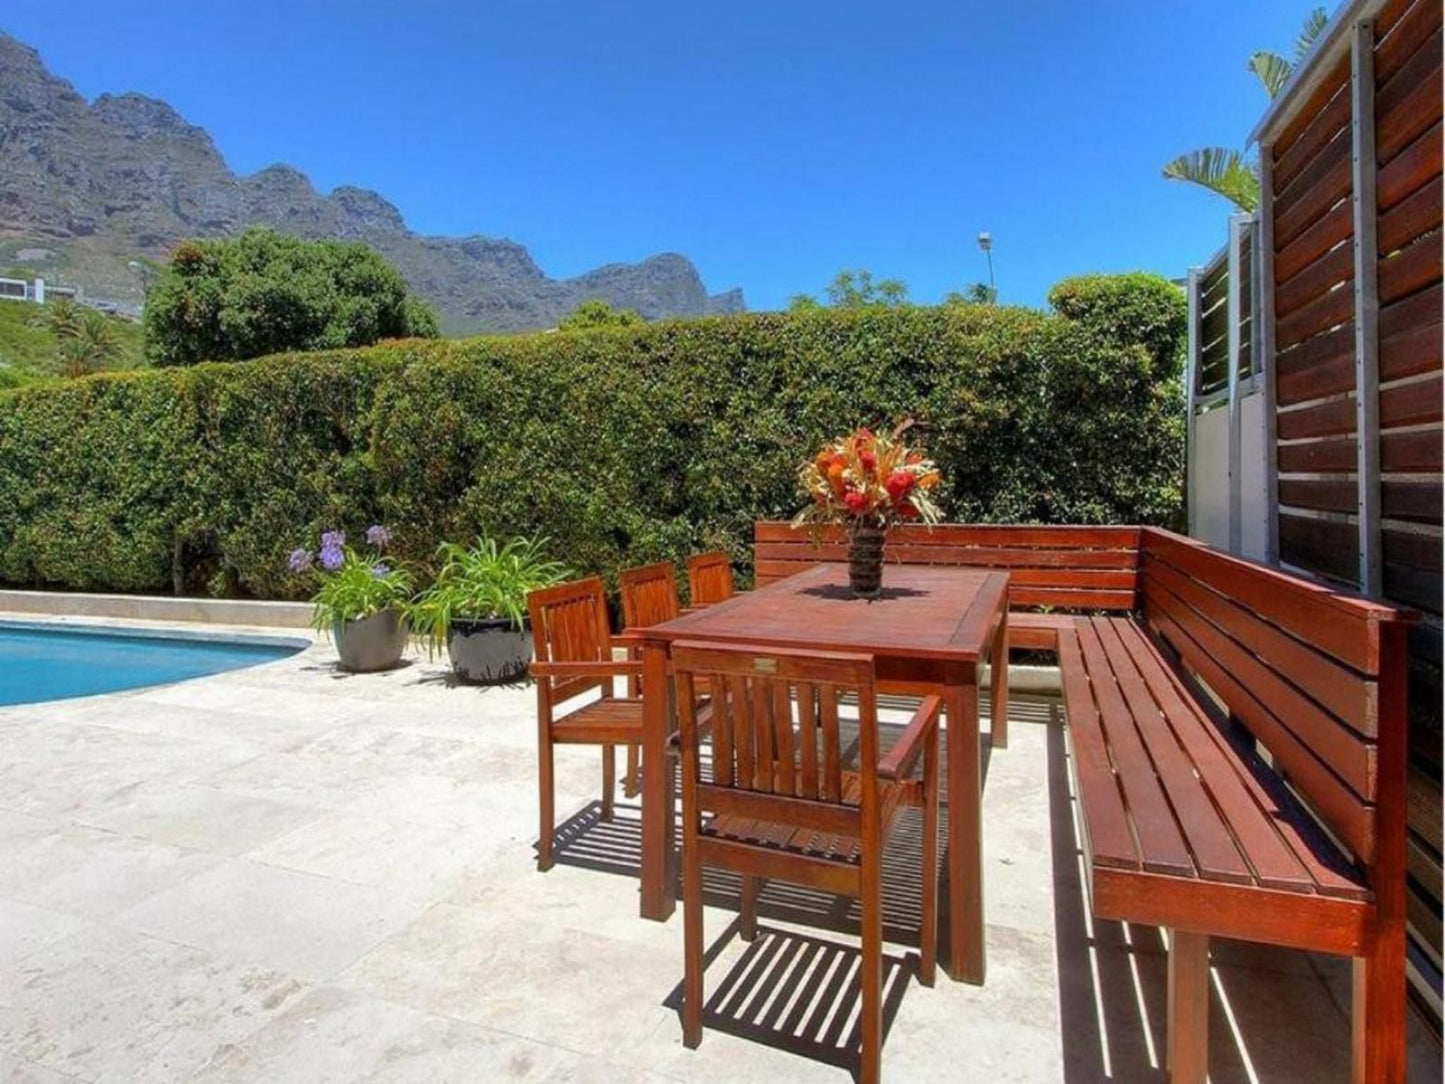 Vetho Villa Camps Bay Cape Town Western Cape South Africa Complementary Colors